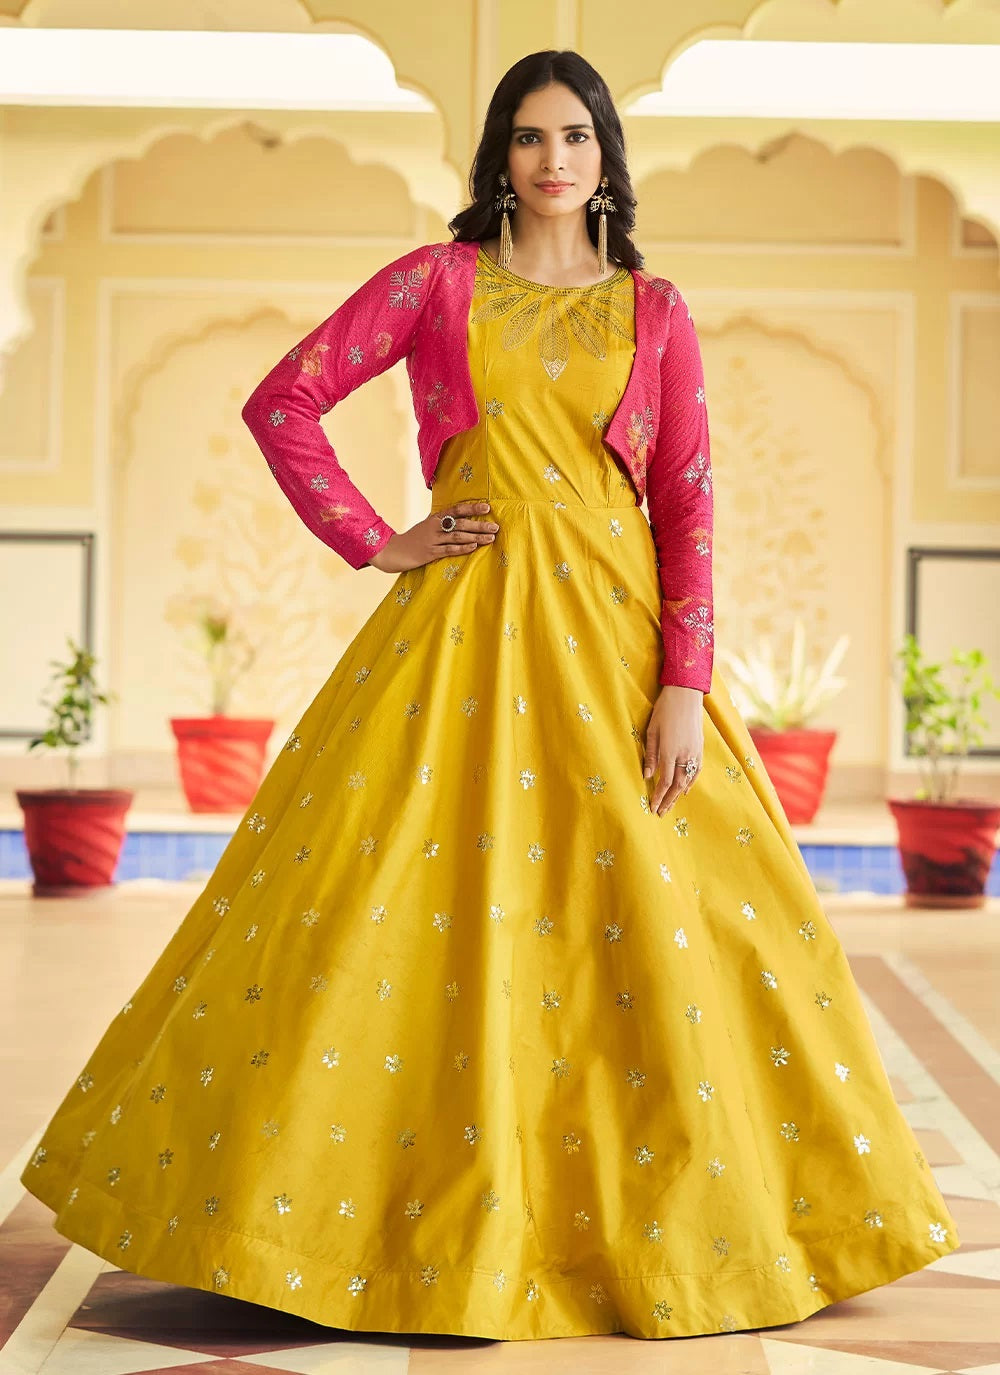 MAL COTTON GOWN WITH EMBROIDERY, ZARI & MIRROR WORK COMES WITH DUPATTA –  FRILLHILLS